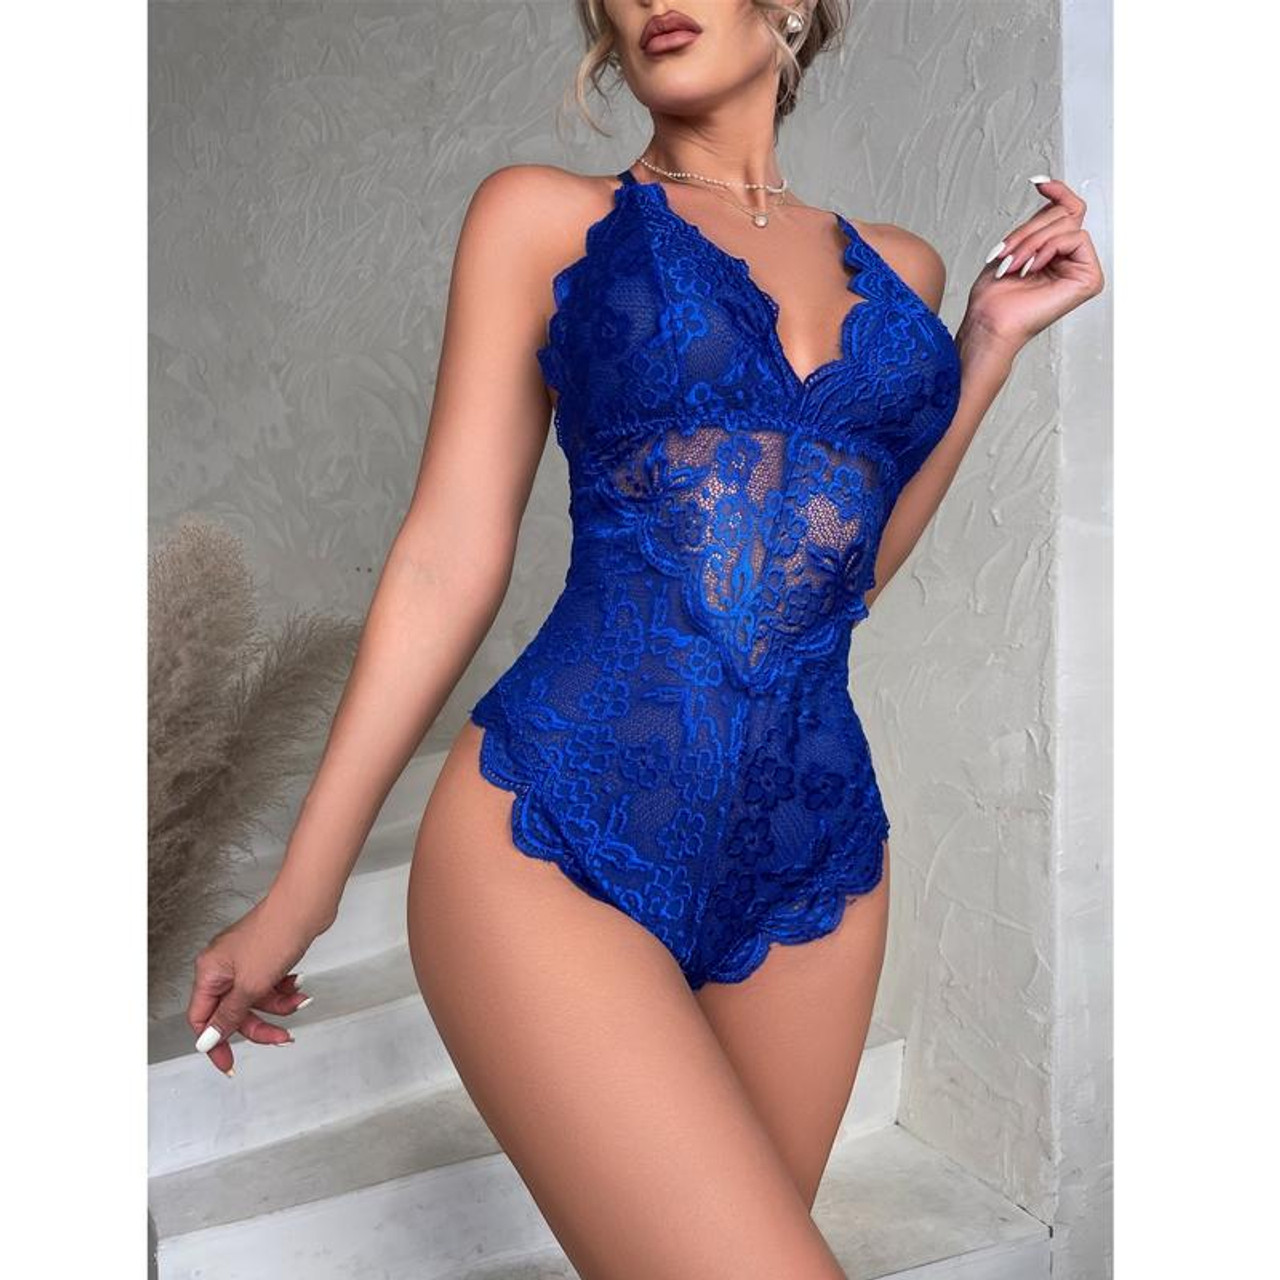 Sexy Outfits Women's Sexy Lingerie Lace Teddy Bodysuits Nightwear With Mask  Underwear Sexy Underwear for Man on Clearance 